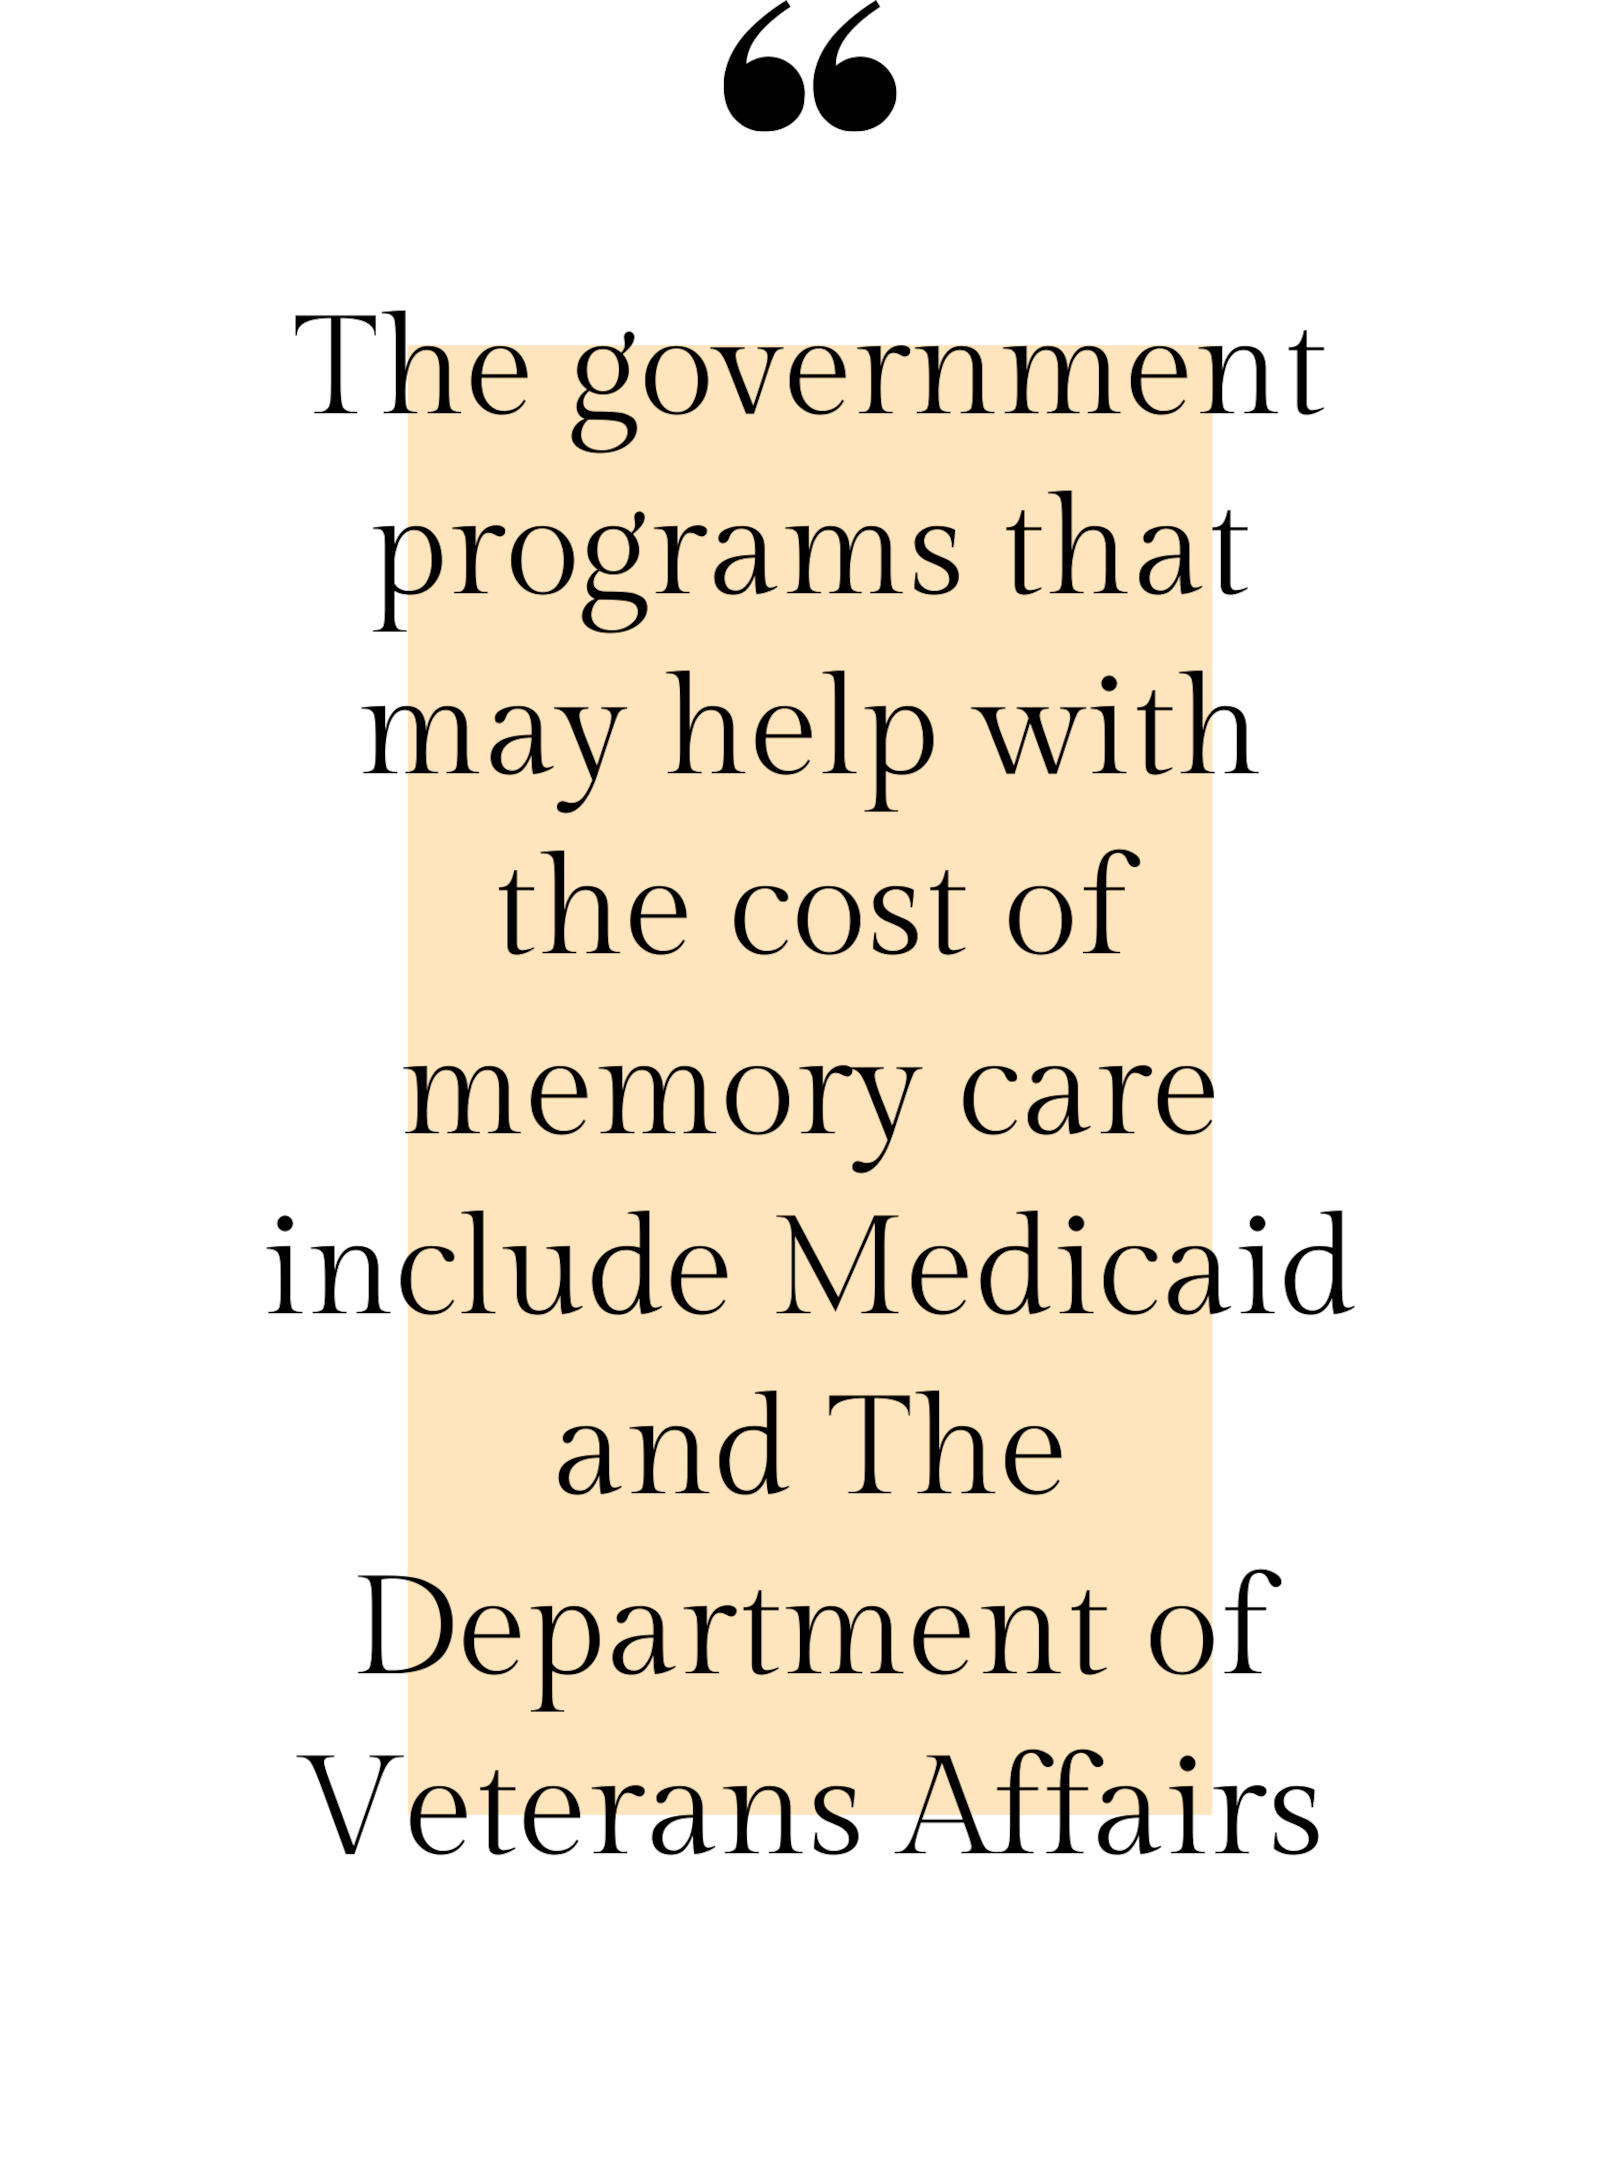 What Are The Government Programs That Help With The Cost Of Memory Care